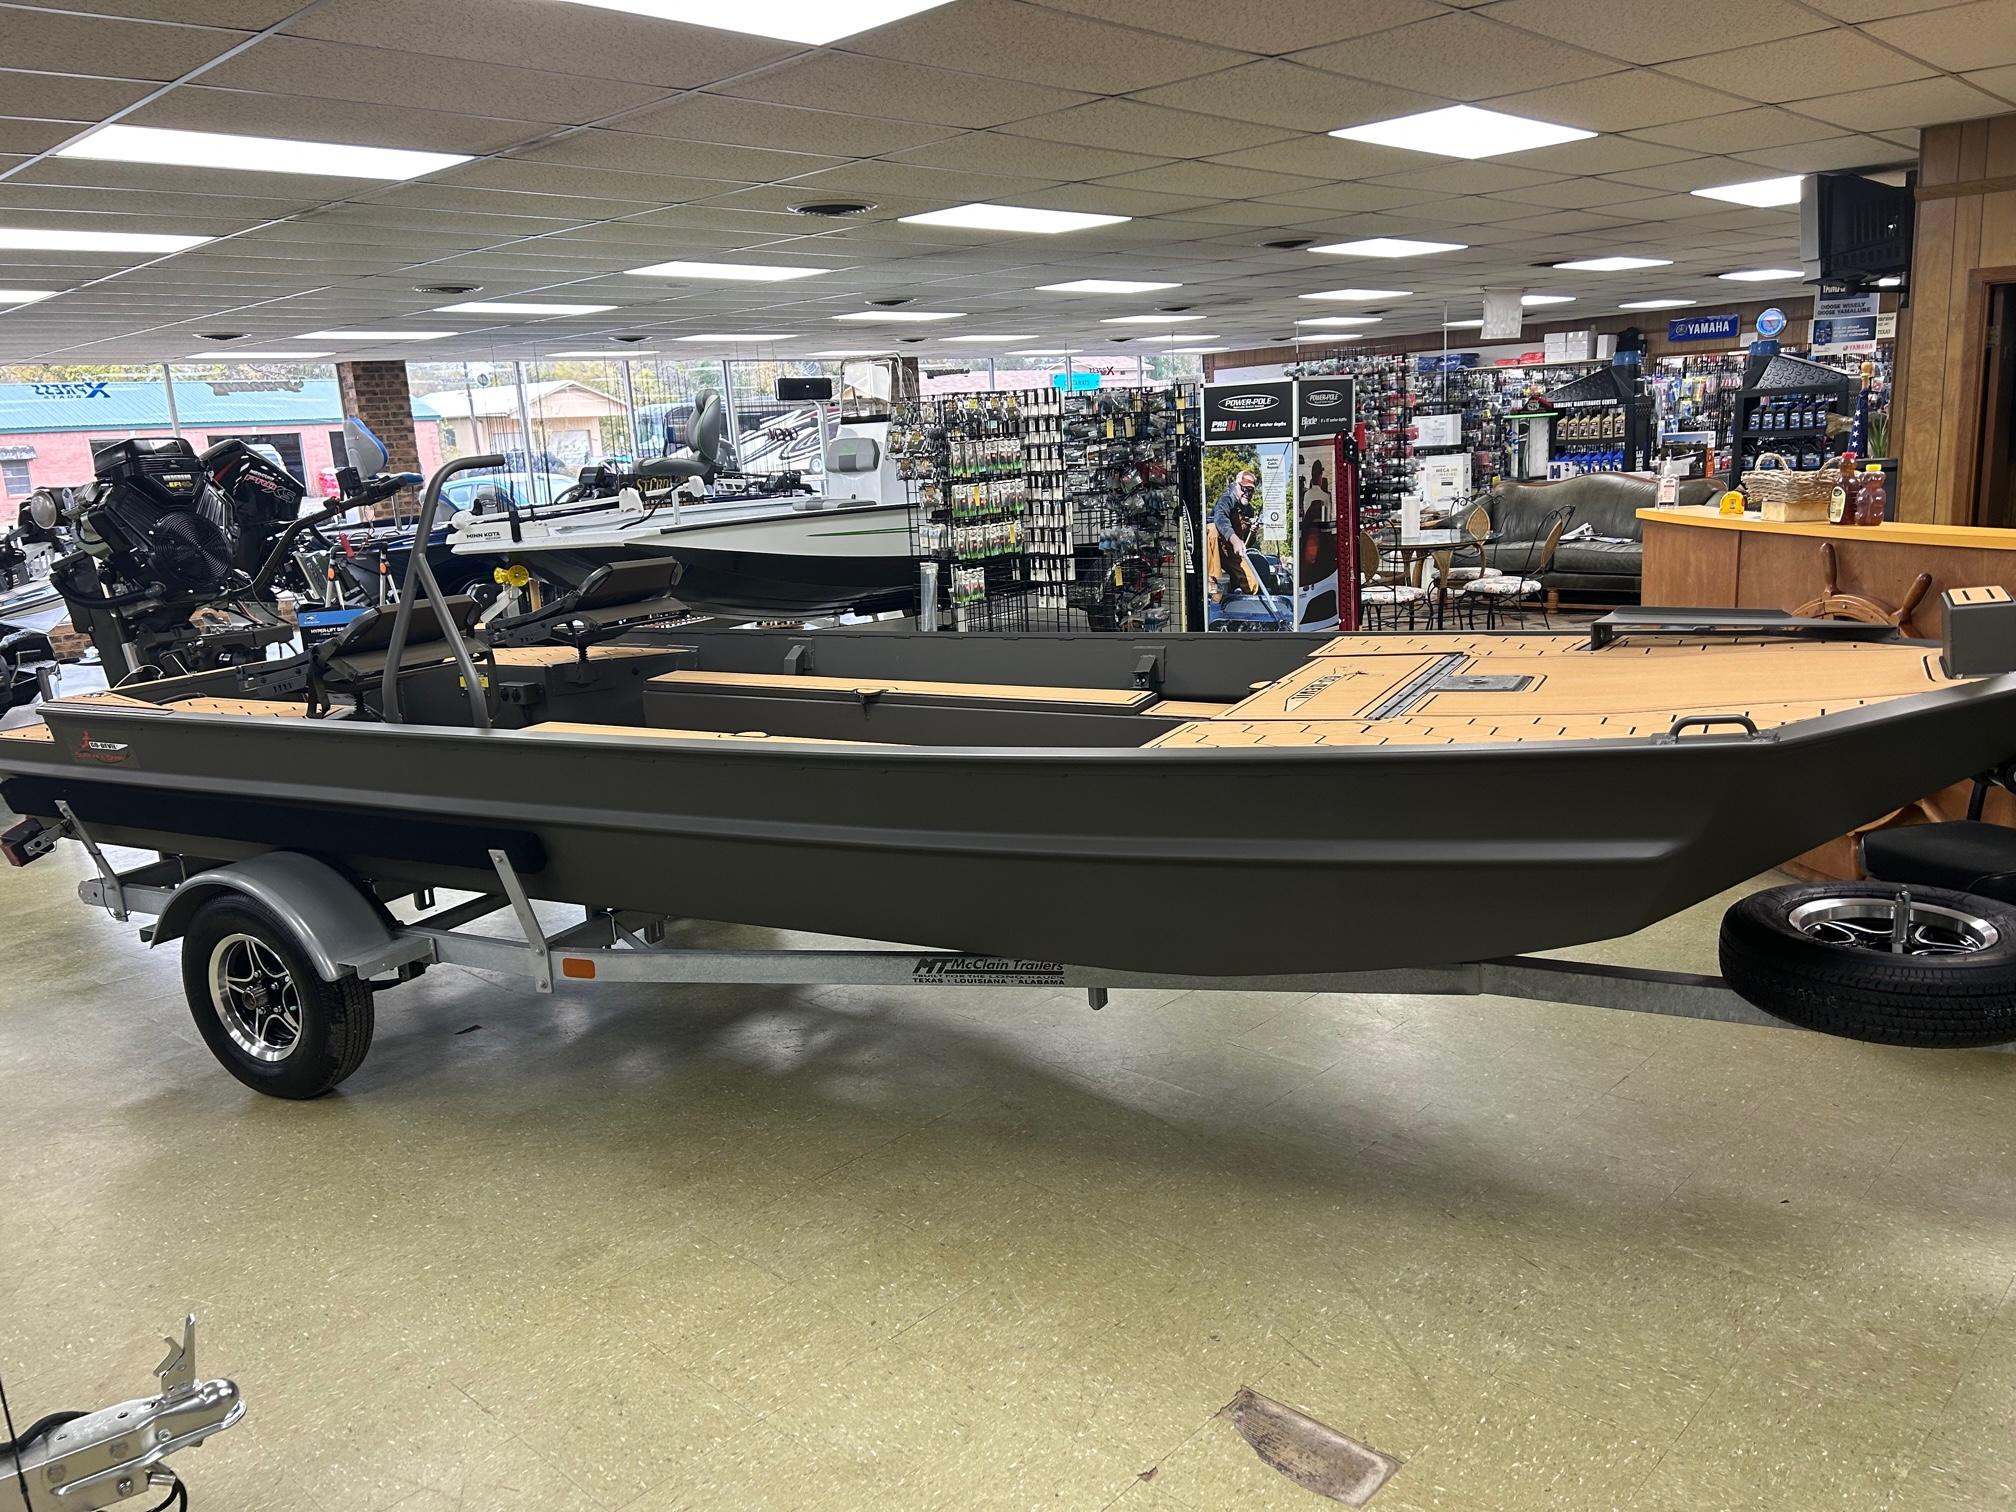 New 2023 Go-Devil 18x54 Open Floor Surface Drive Boat, 75647 Gladewater -  Boat Trader